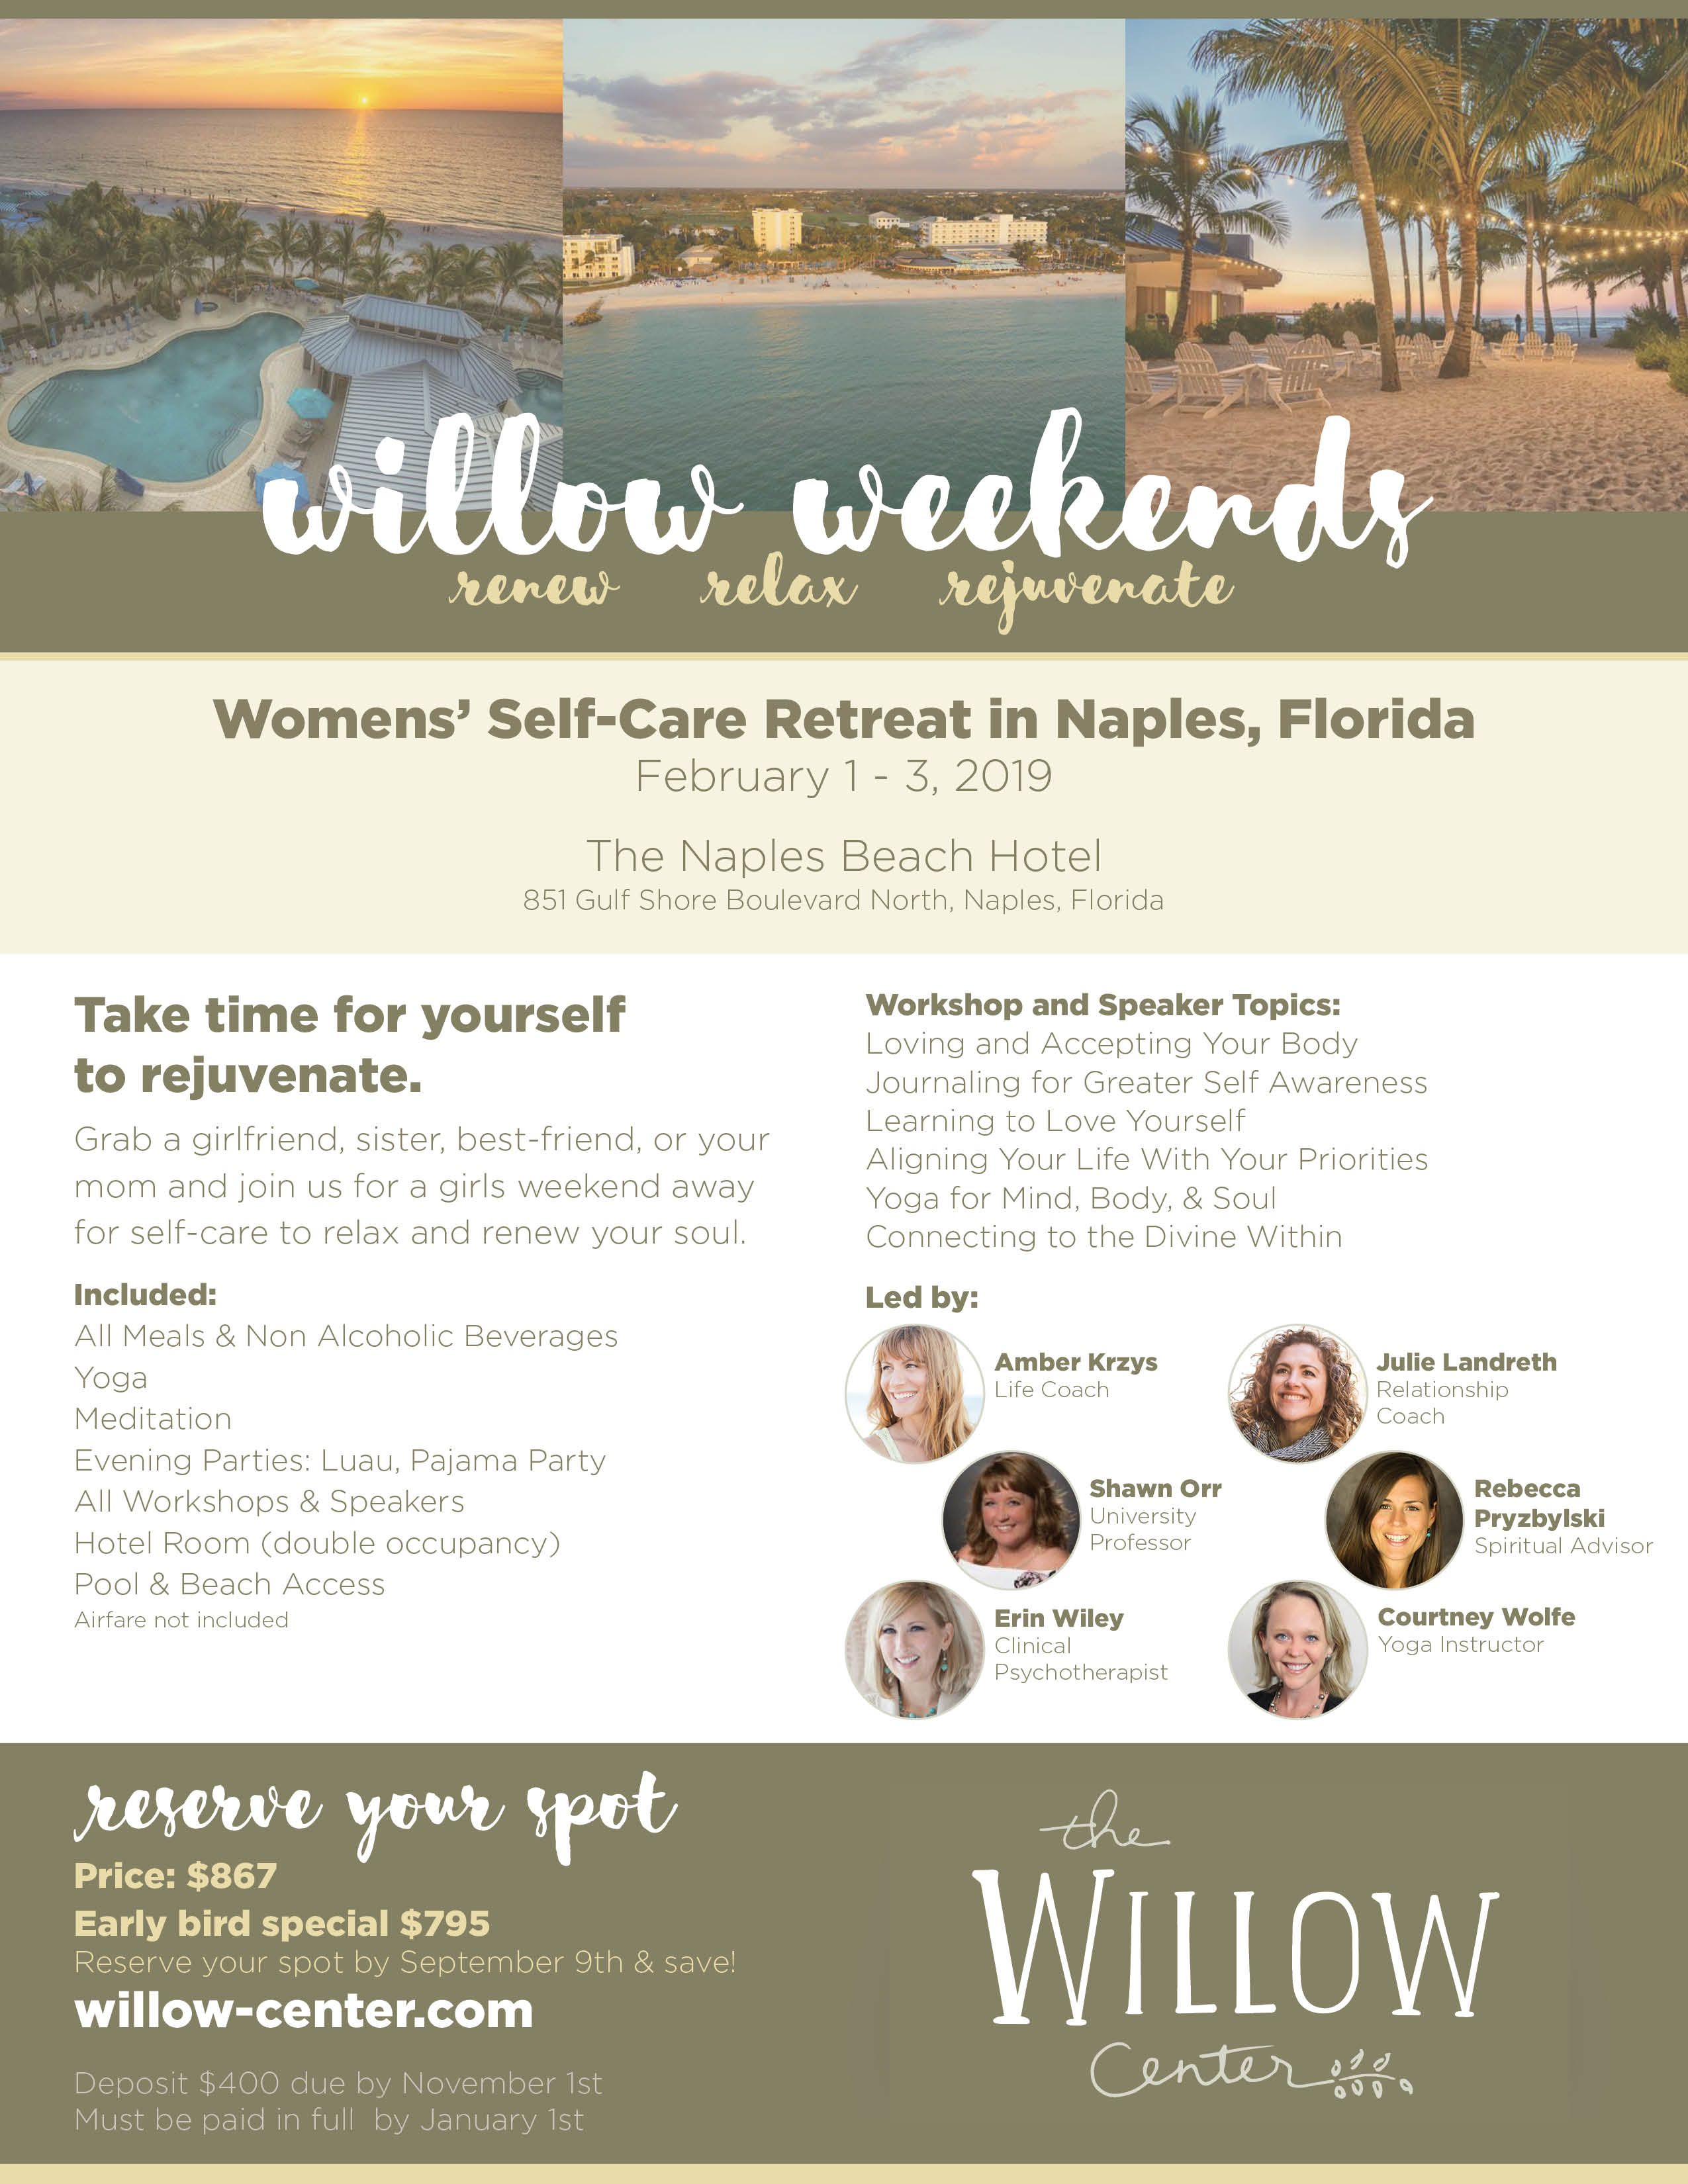 2019 Willow Weekend Flyer Manage Your Shift